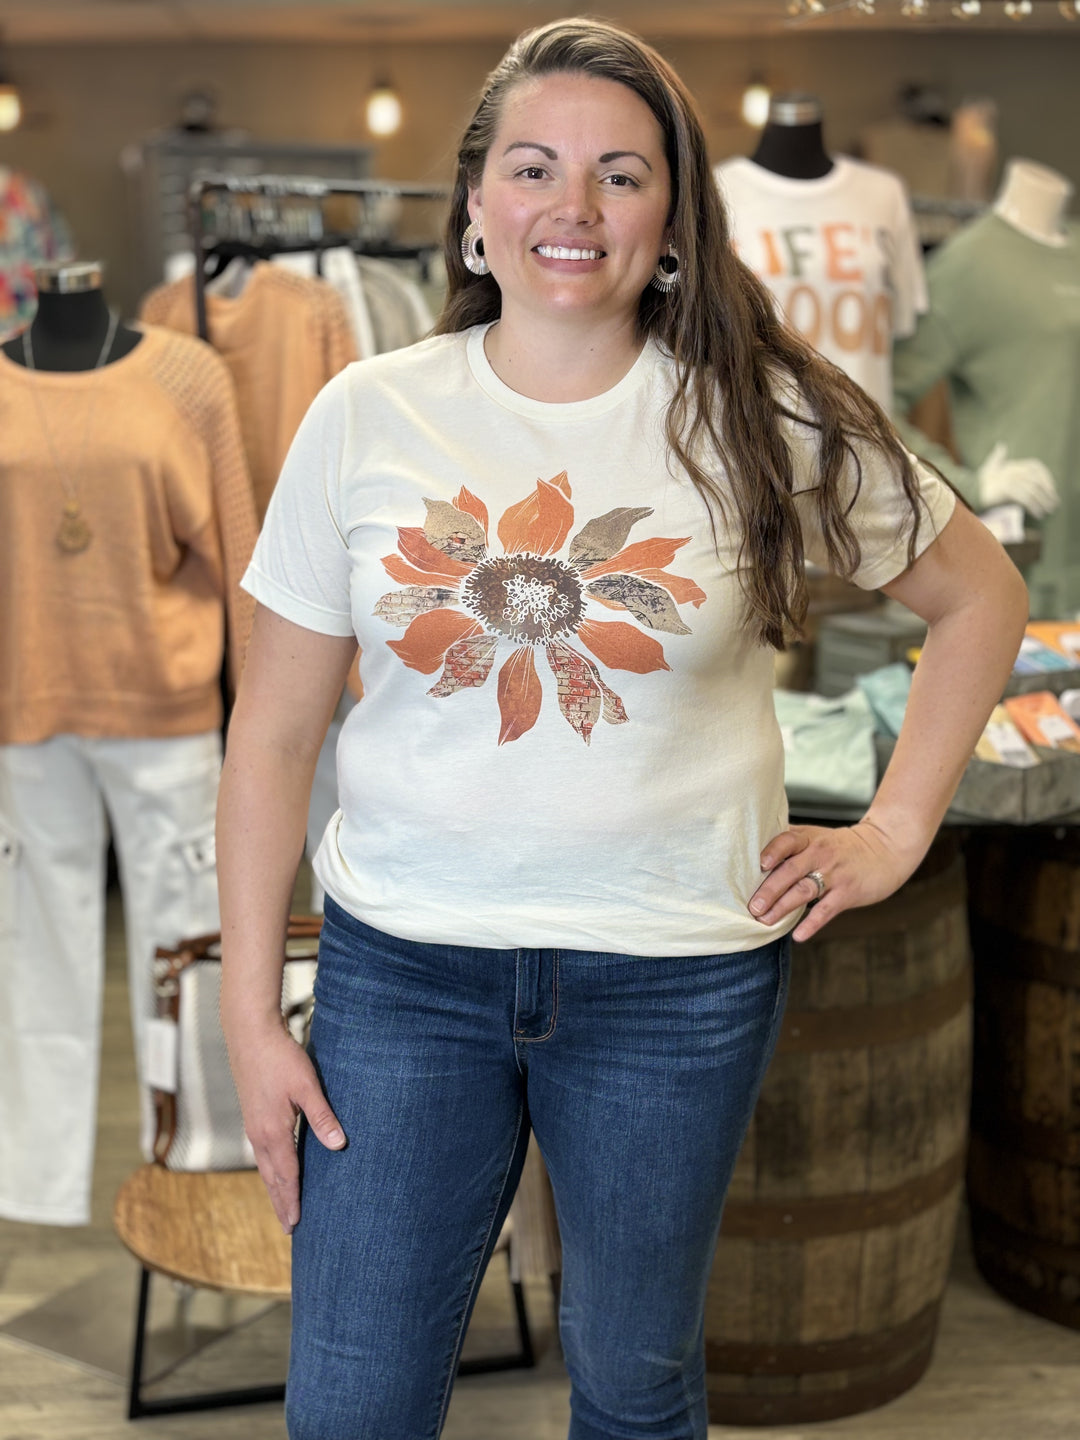 Grunge Sunflower Floral Tees-Graphic Tees-Partees by Party On!-Evergreen Boutique, Women’s Fashion Boutique in Santa Claus, Indiana